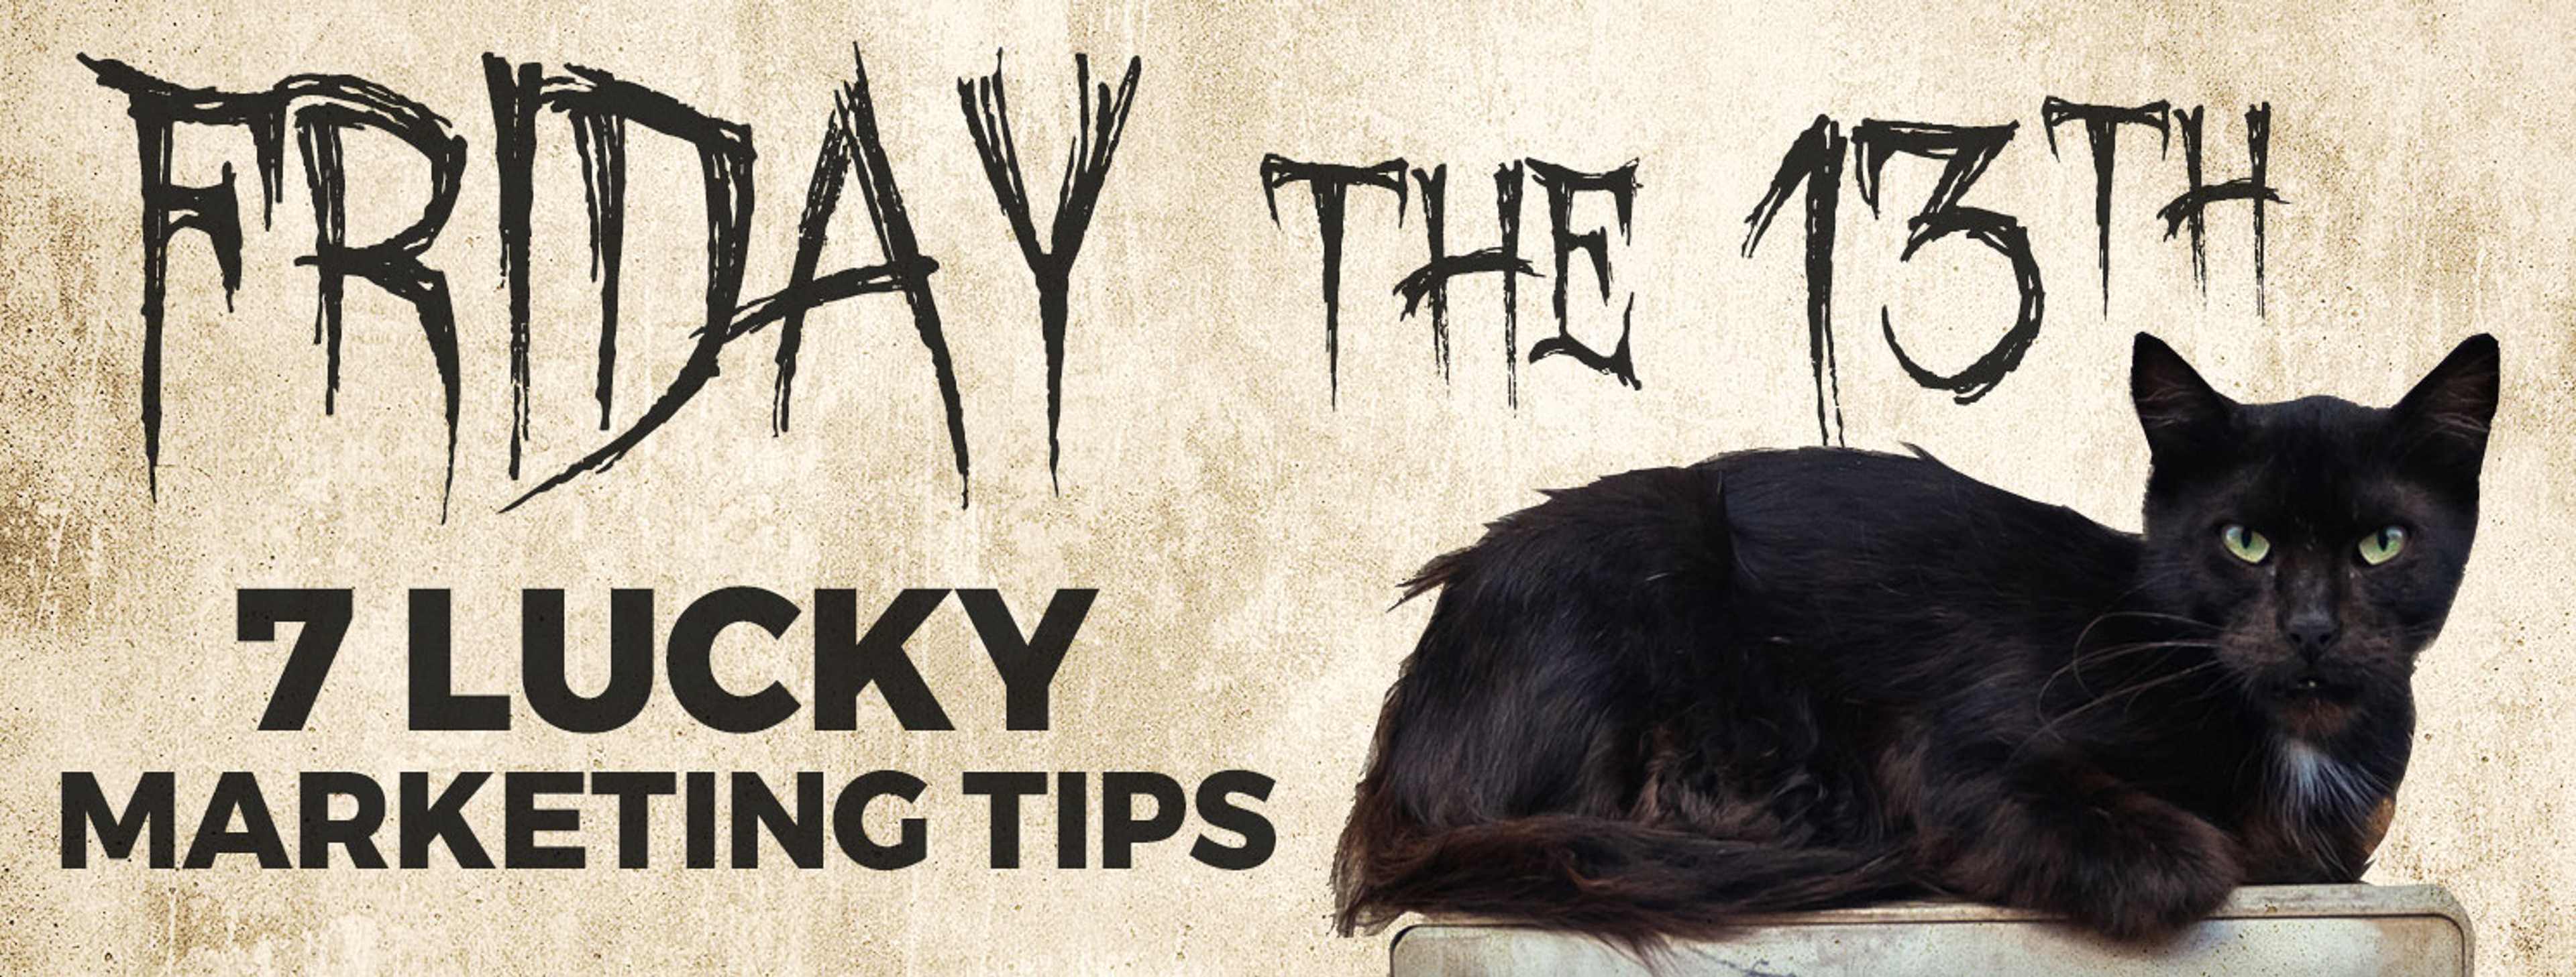 Cover for 7 Lucky Marketing Tips for Friday the 13th